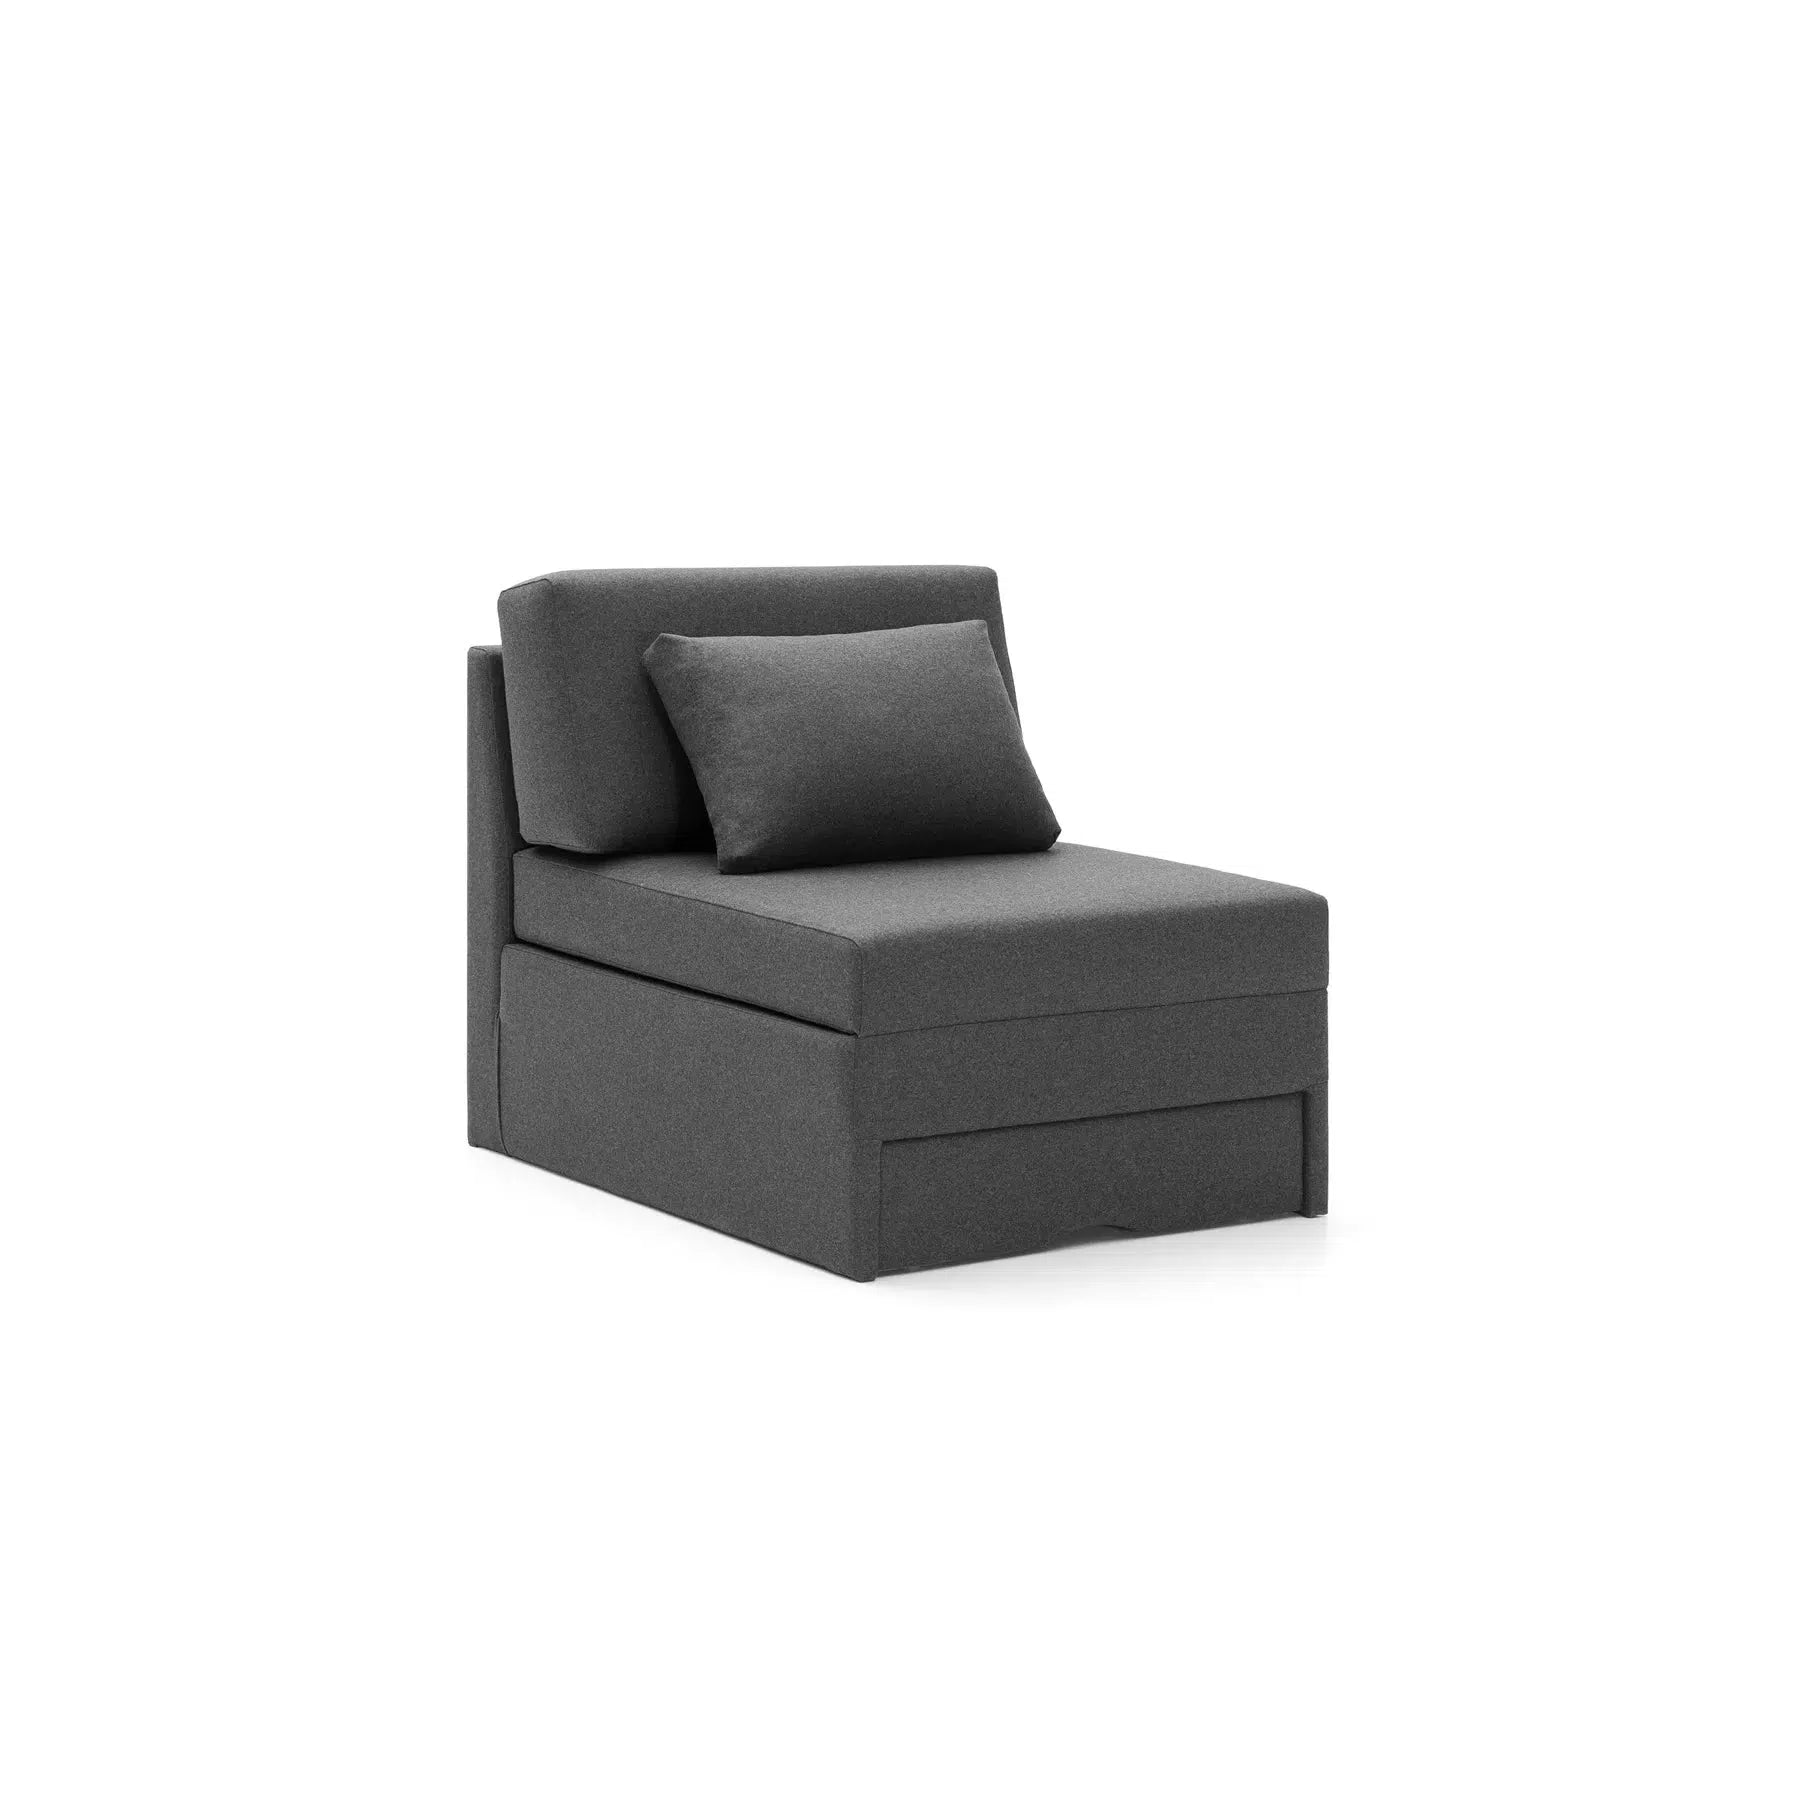 Meno 933 Lounge Sofa Bed-TM Leader-Contract Furniture Store